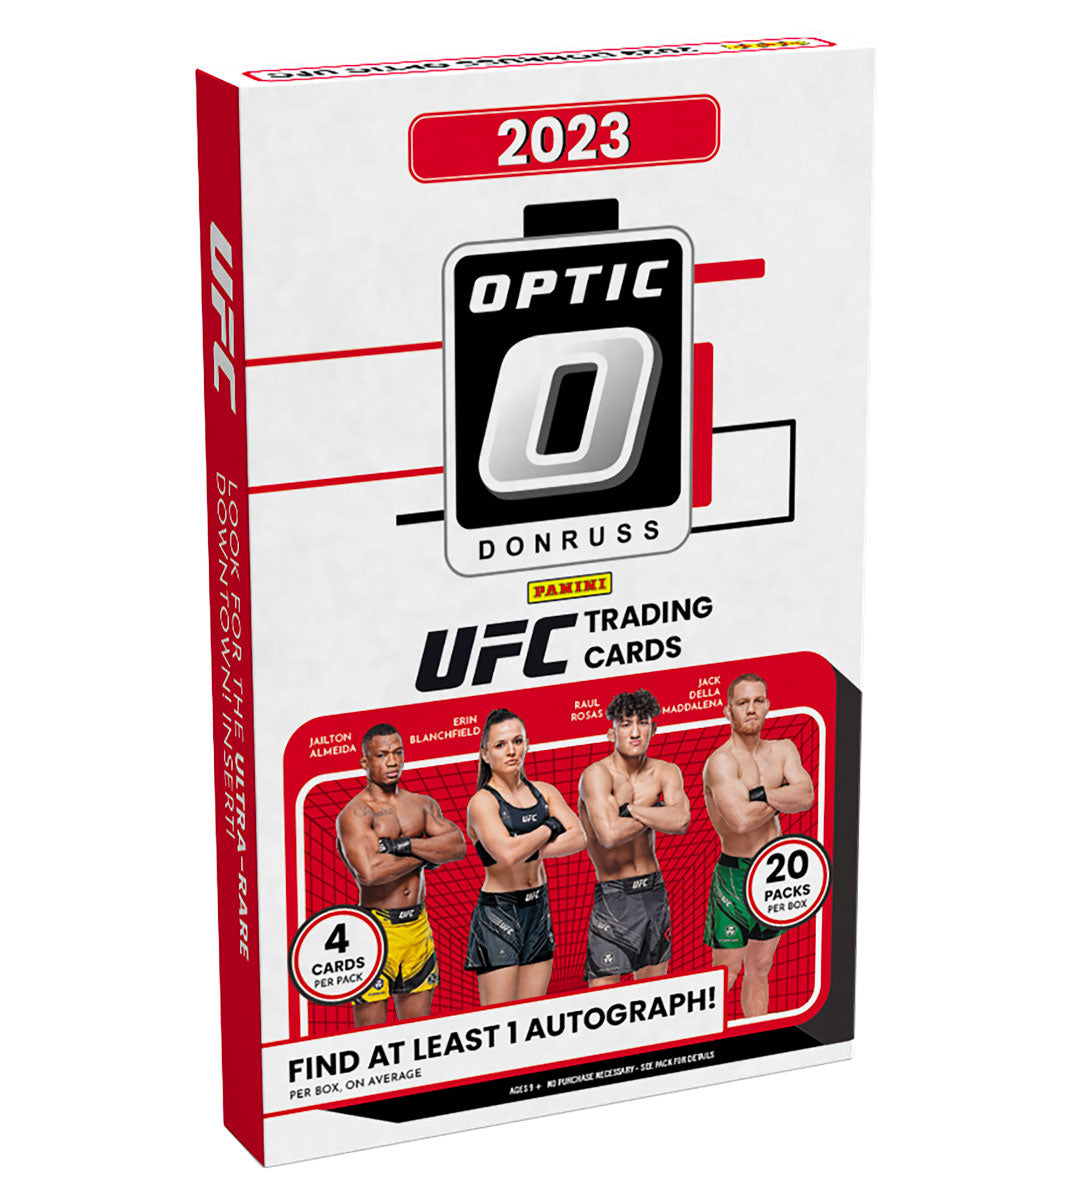 2023 Panini Donruss Optic UFC Hobby Box Feel the excitement of UFC action with the 2023 Panini Donruss Optic Hobby Box! This box contains 20 exclusive packs of Optic trading cards, with 1 autograph per box. Prepare to be amazed by the foil and acetate cards of your favorite UFC stars! Experience the thrill of collecting each season!